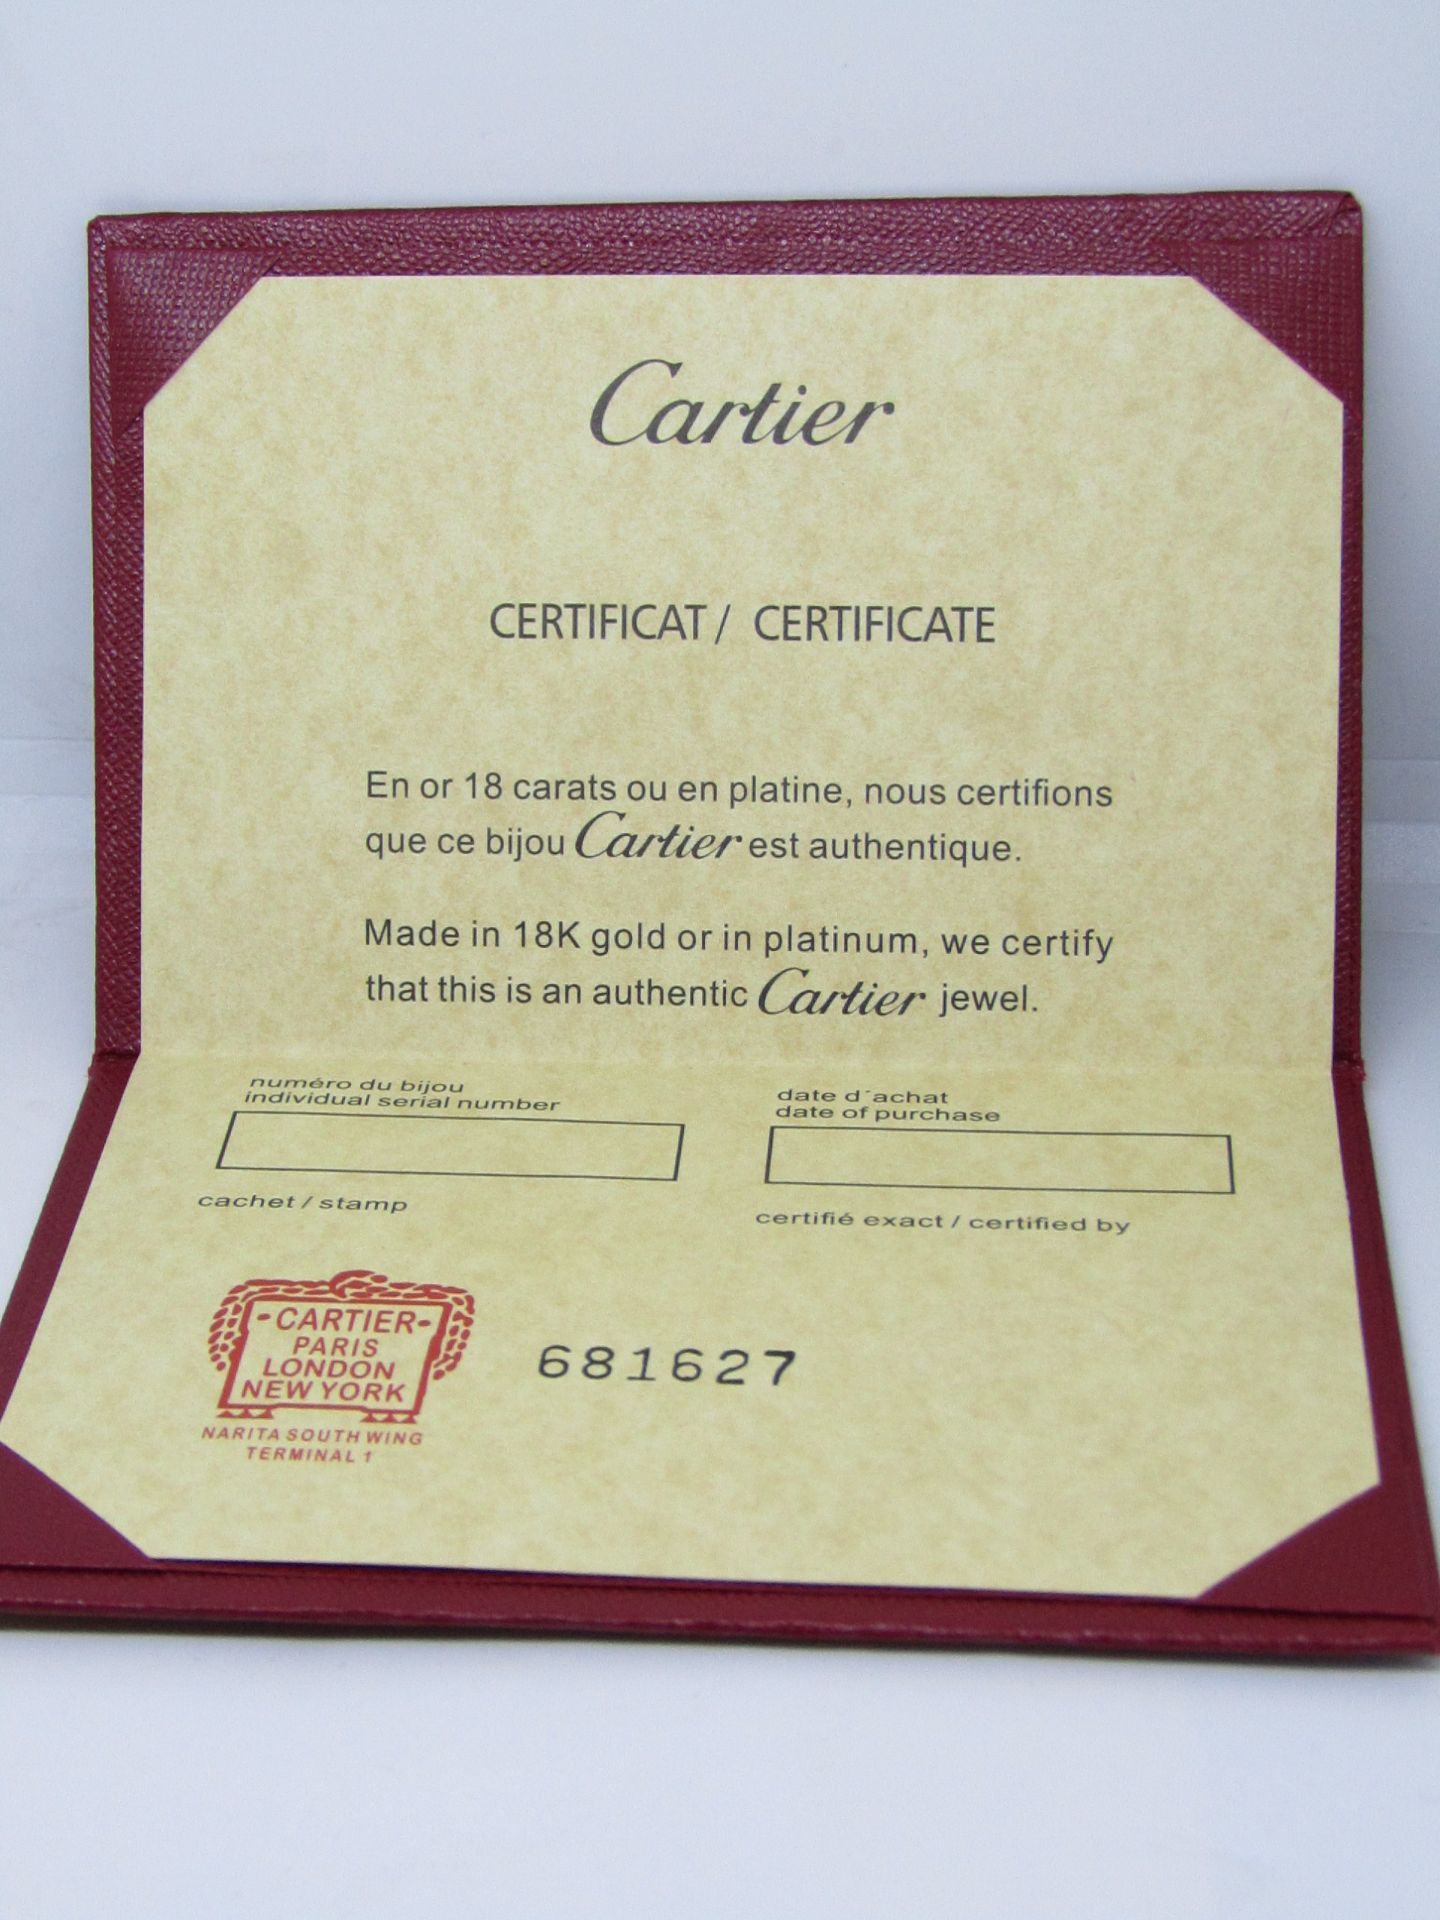 Cartier 18ct Pink Gold 0.02 ct Diamond Ring in original box with certificate RRP £1,800 - Image 5 of 5